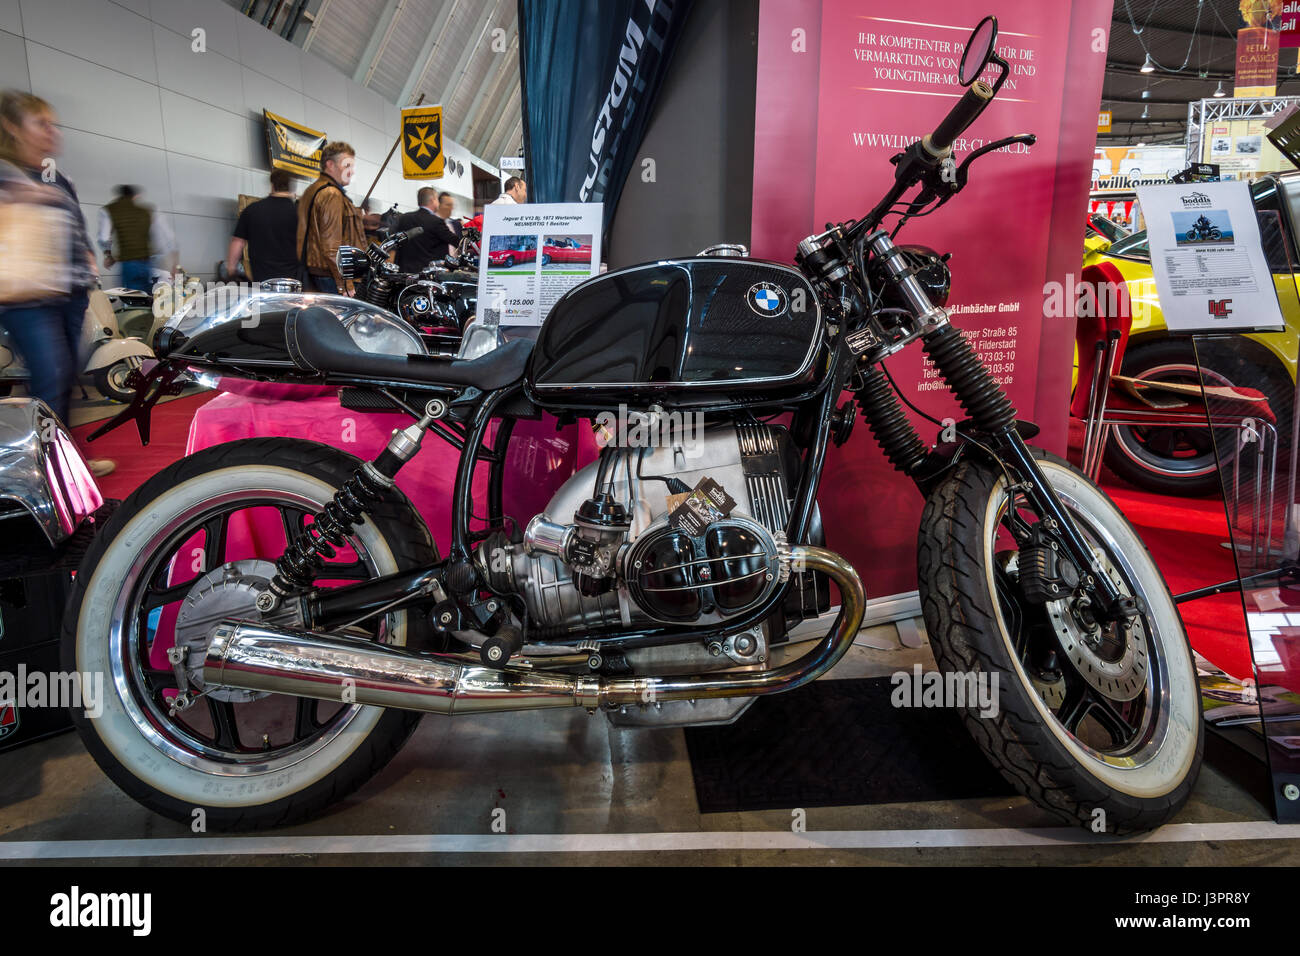 STUTTGART, GERMANY - MARCH 03, 2017: The motorcycle BMW R100 Cafe Racer, 1991. Europe's greatest classic car exhibition 'RETRO CLASSICS' Stock Photo